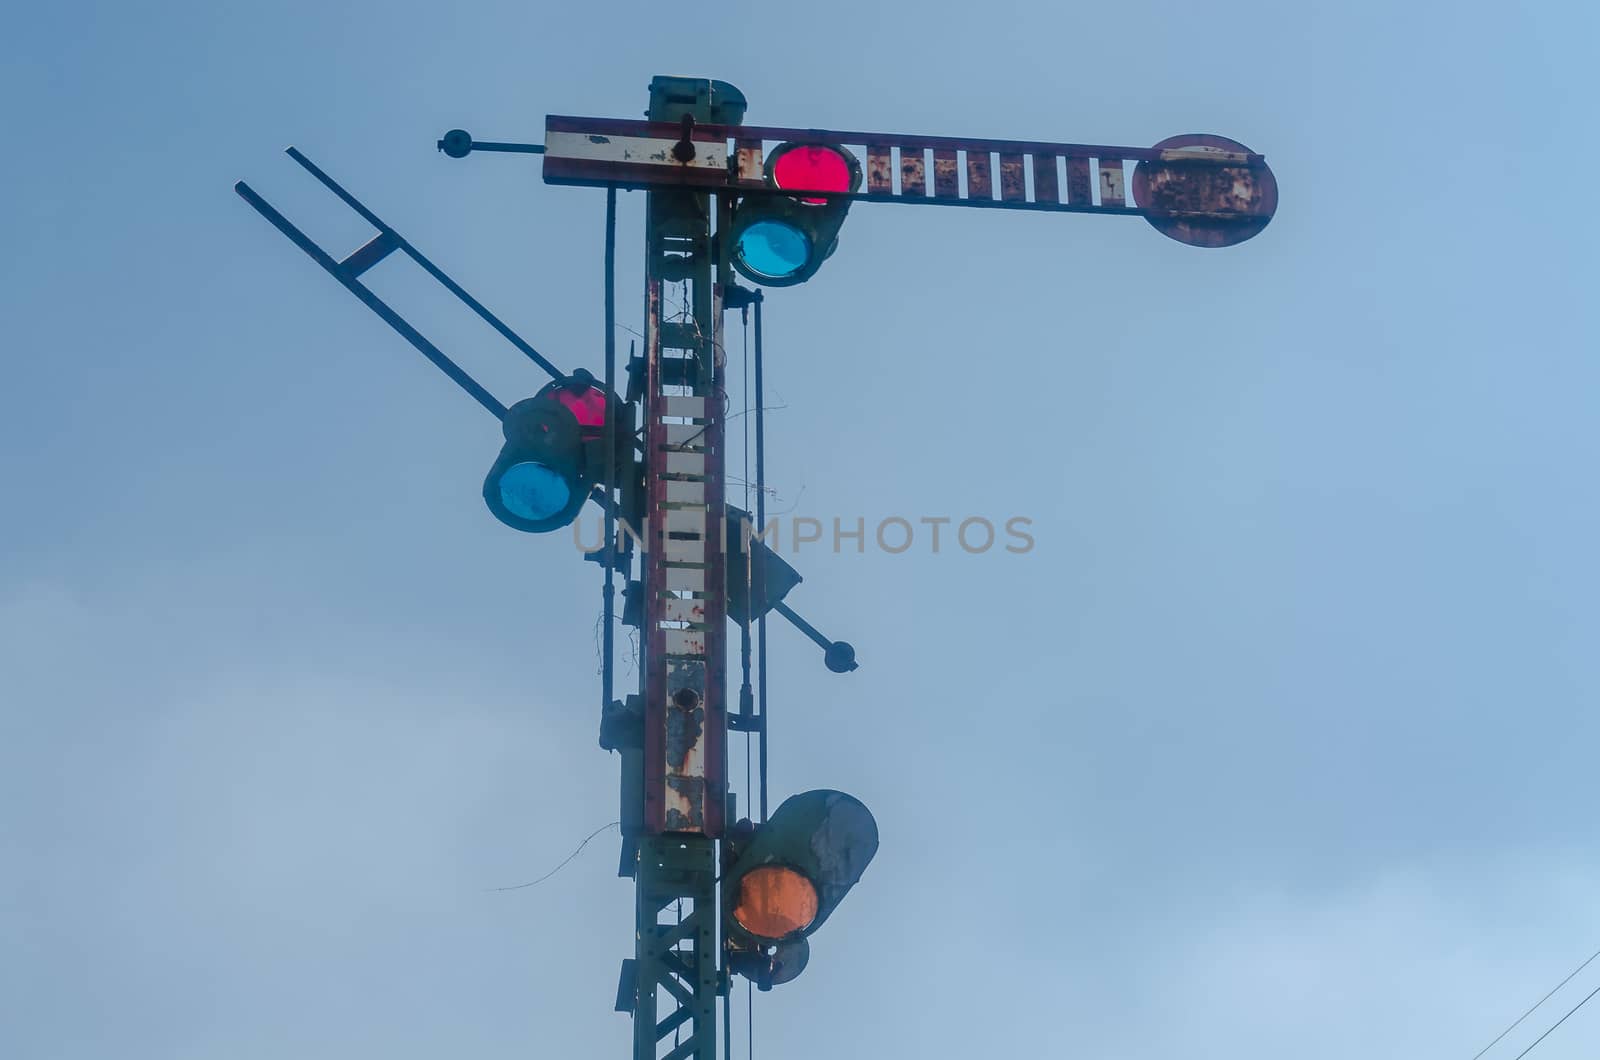 Old railway signal. The signals regulate visually, acoustically or electronically the rail transport.